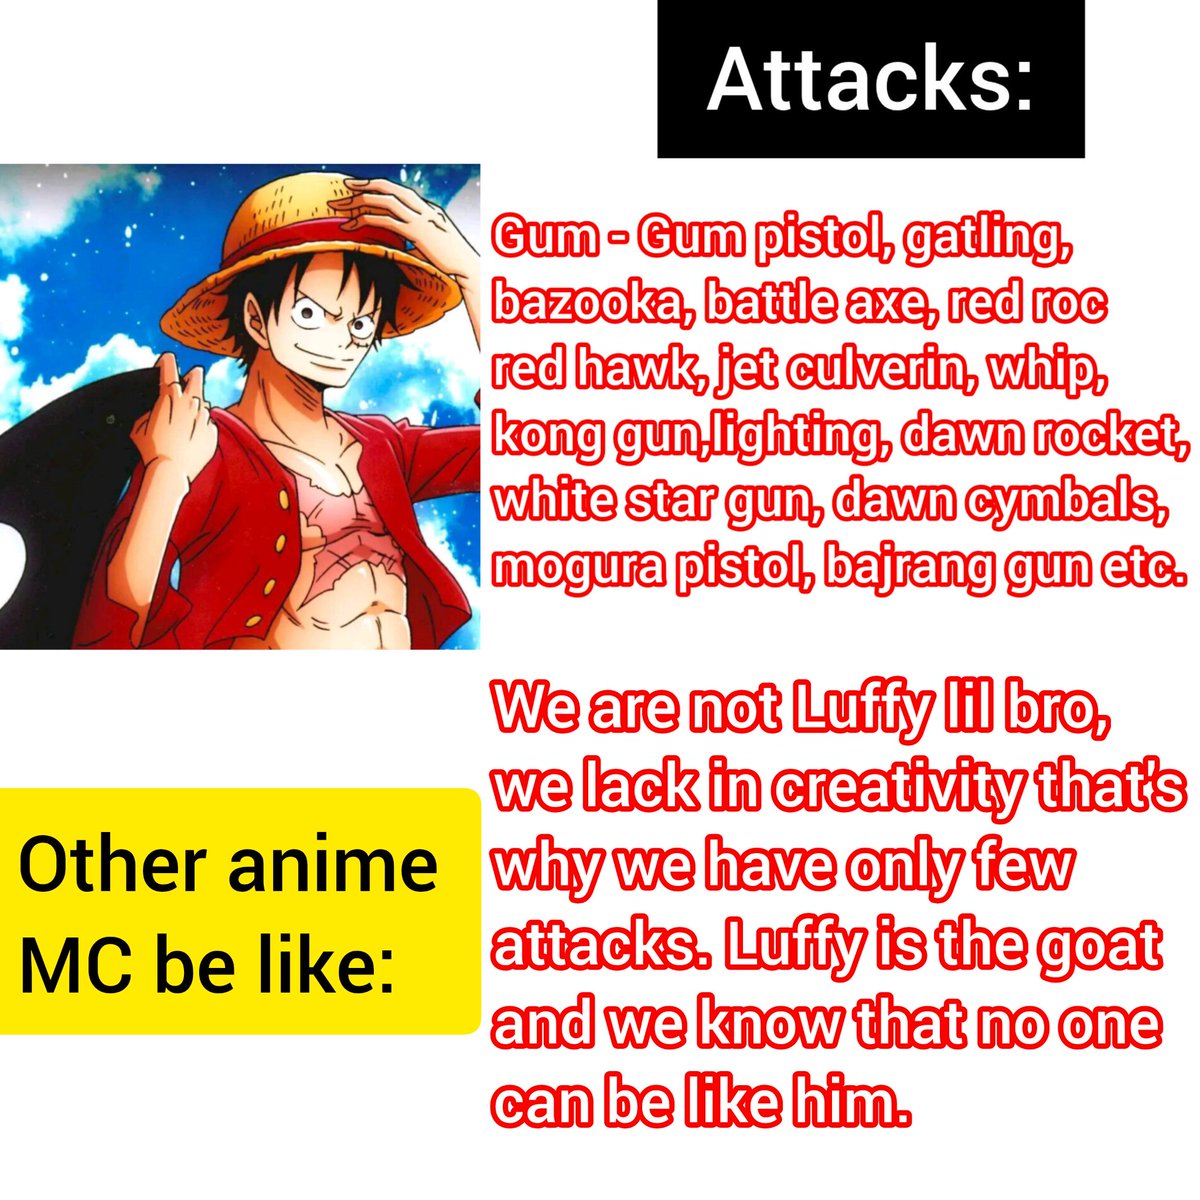 luffy has so many different attacks and on the other hand mc like Goku screaming all the time also Ichigo & Naruto spam the same shit every time They're not creative like my goat luffy😮‍💨